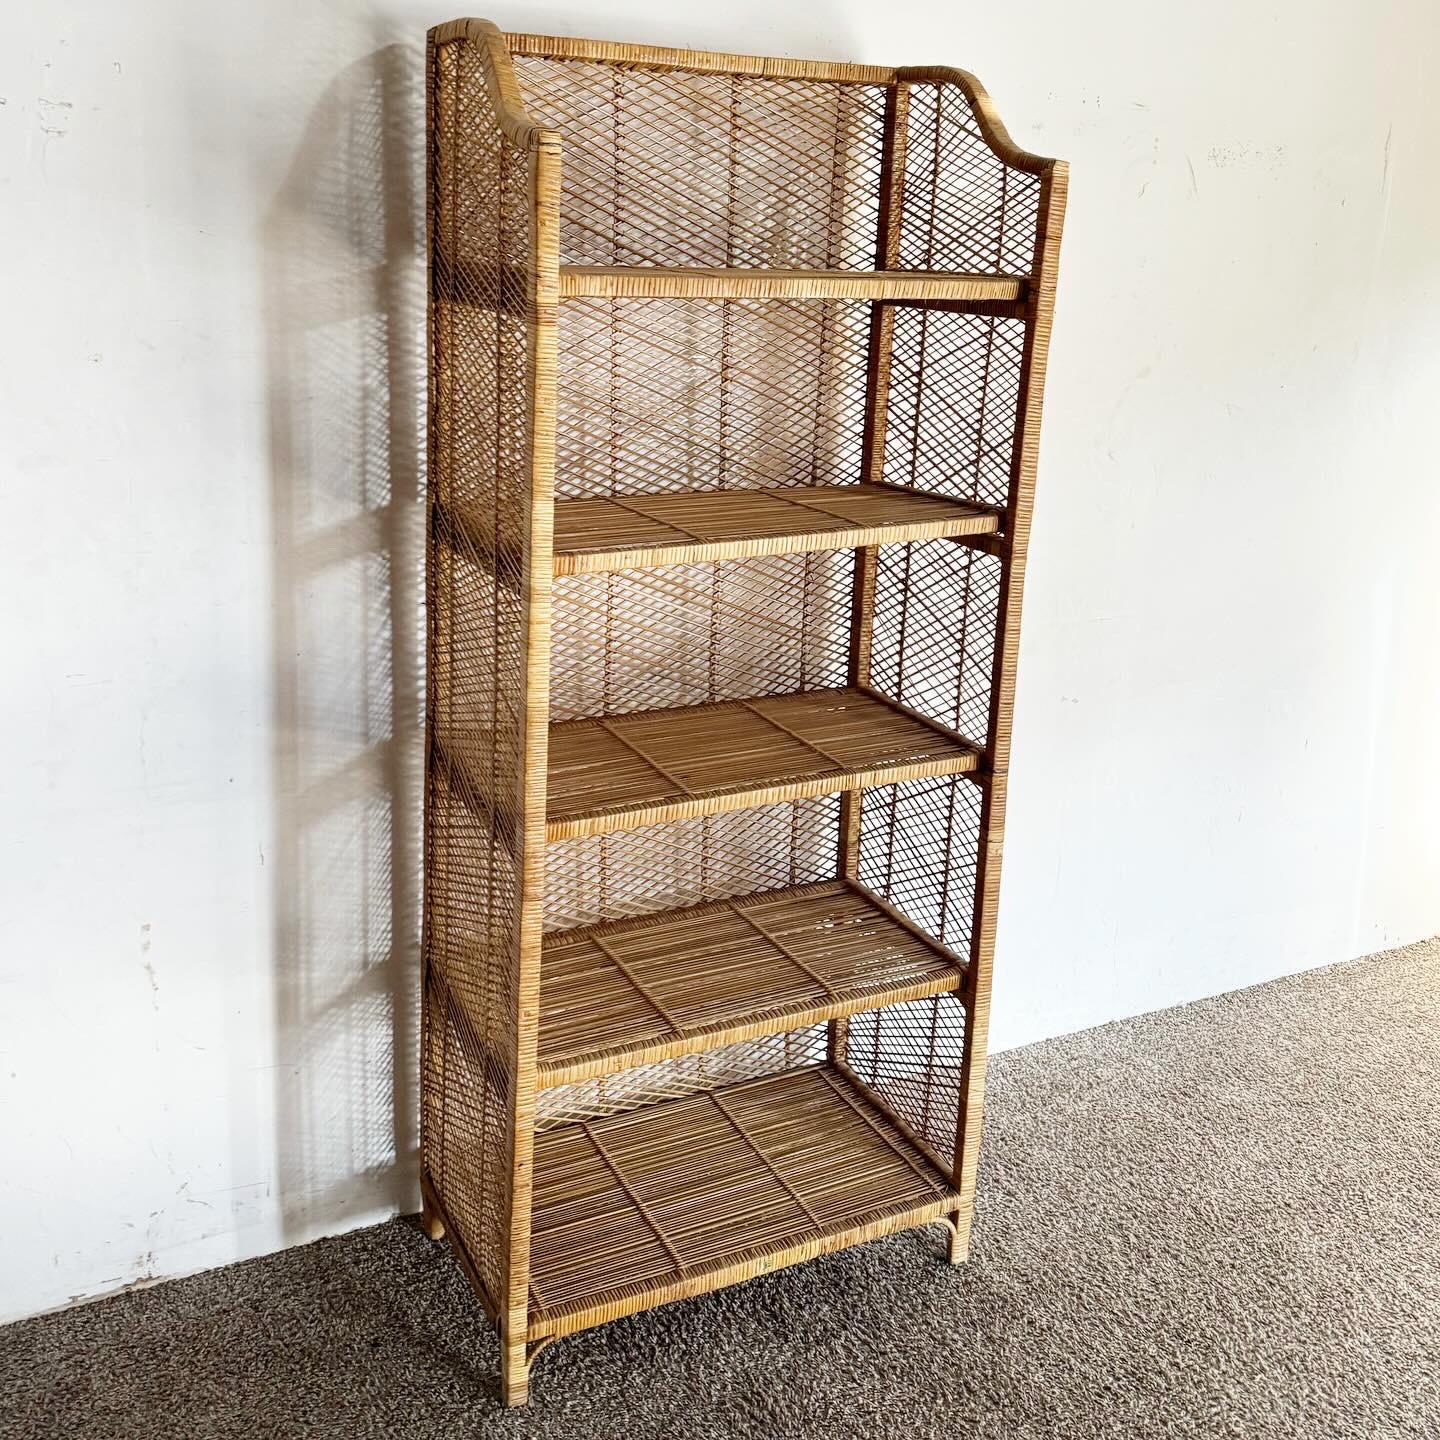 Bring a relaxed charm to your space with the Boho Chic Wicker Rattan Etagere With 4 Removable Shelves. Beautifully crafted from wicker and rattan, this etagere offers flexible storage and display with its four removable shelves. Its warm, organic